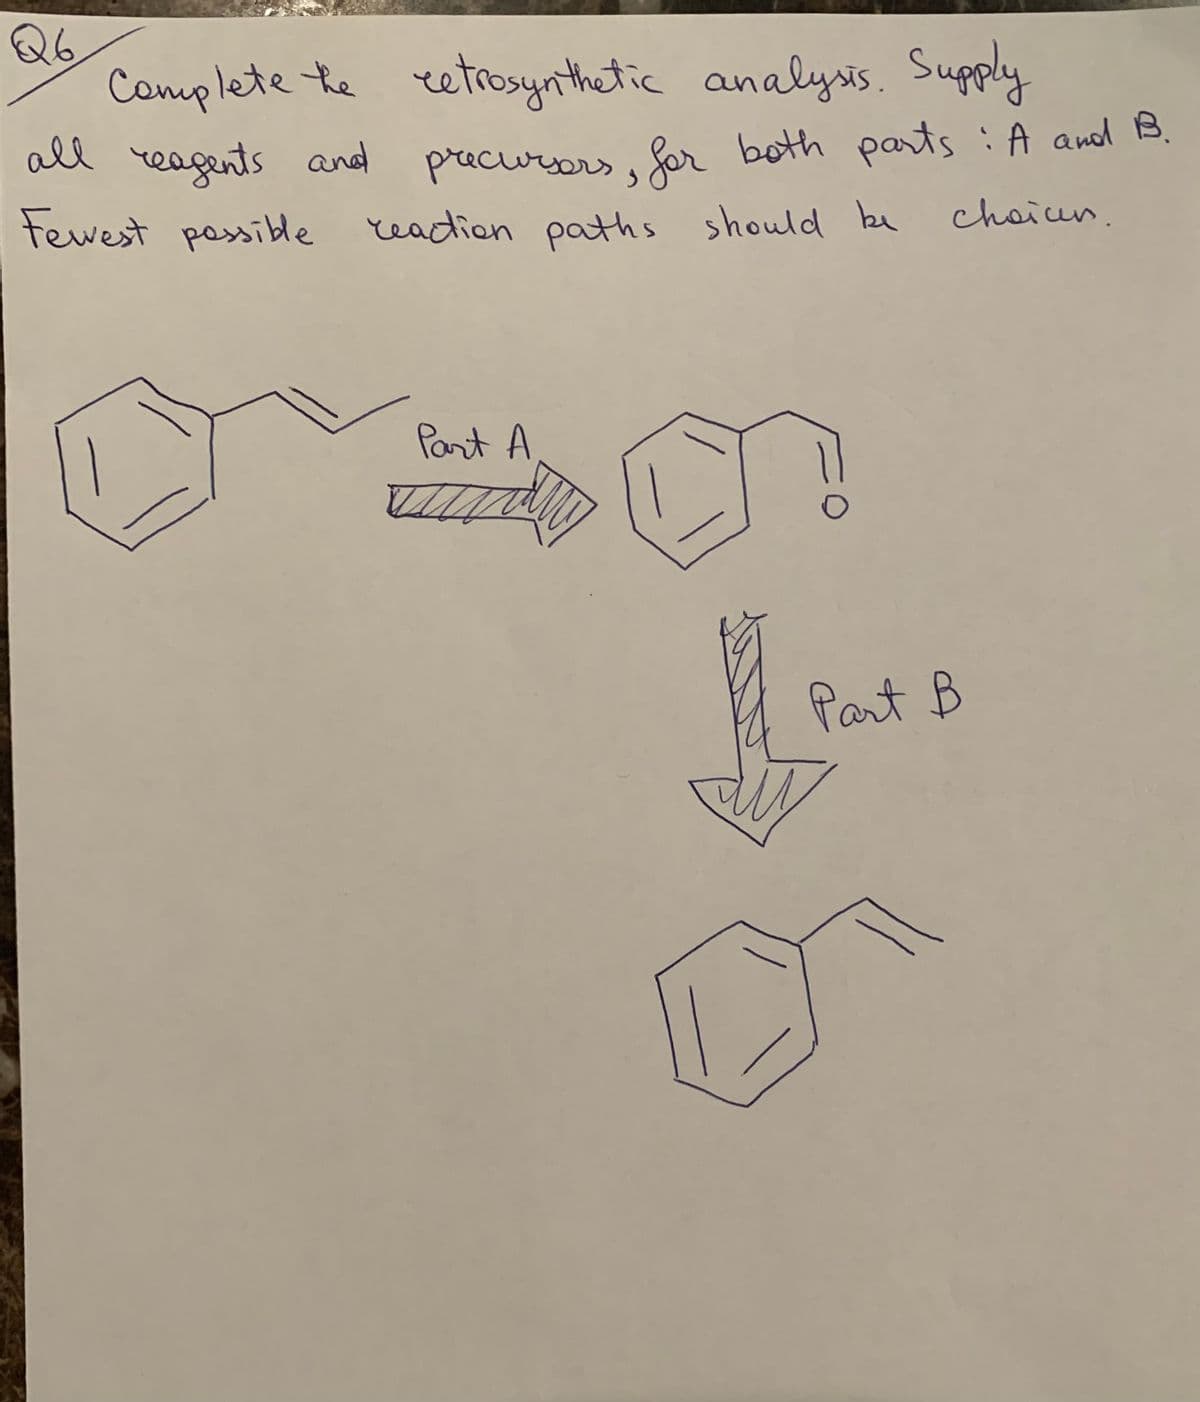 Q6
Complete the retrosynthetic analysis. Supply
all reagents and
precursors, for both parts: A and B.
Fewest possible reaction paths should be
choiun.
Part A
V
Part B
Mi